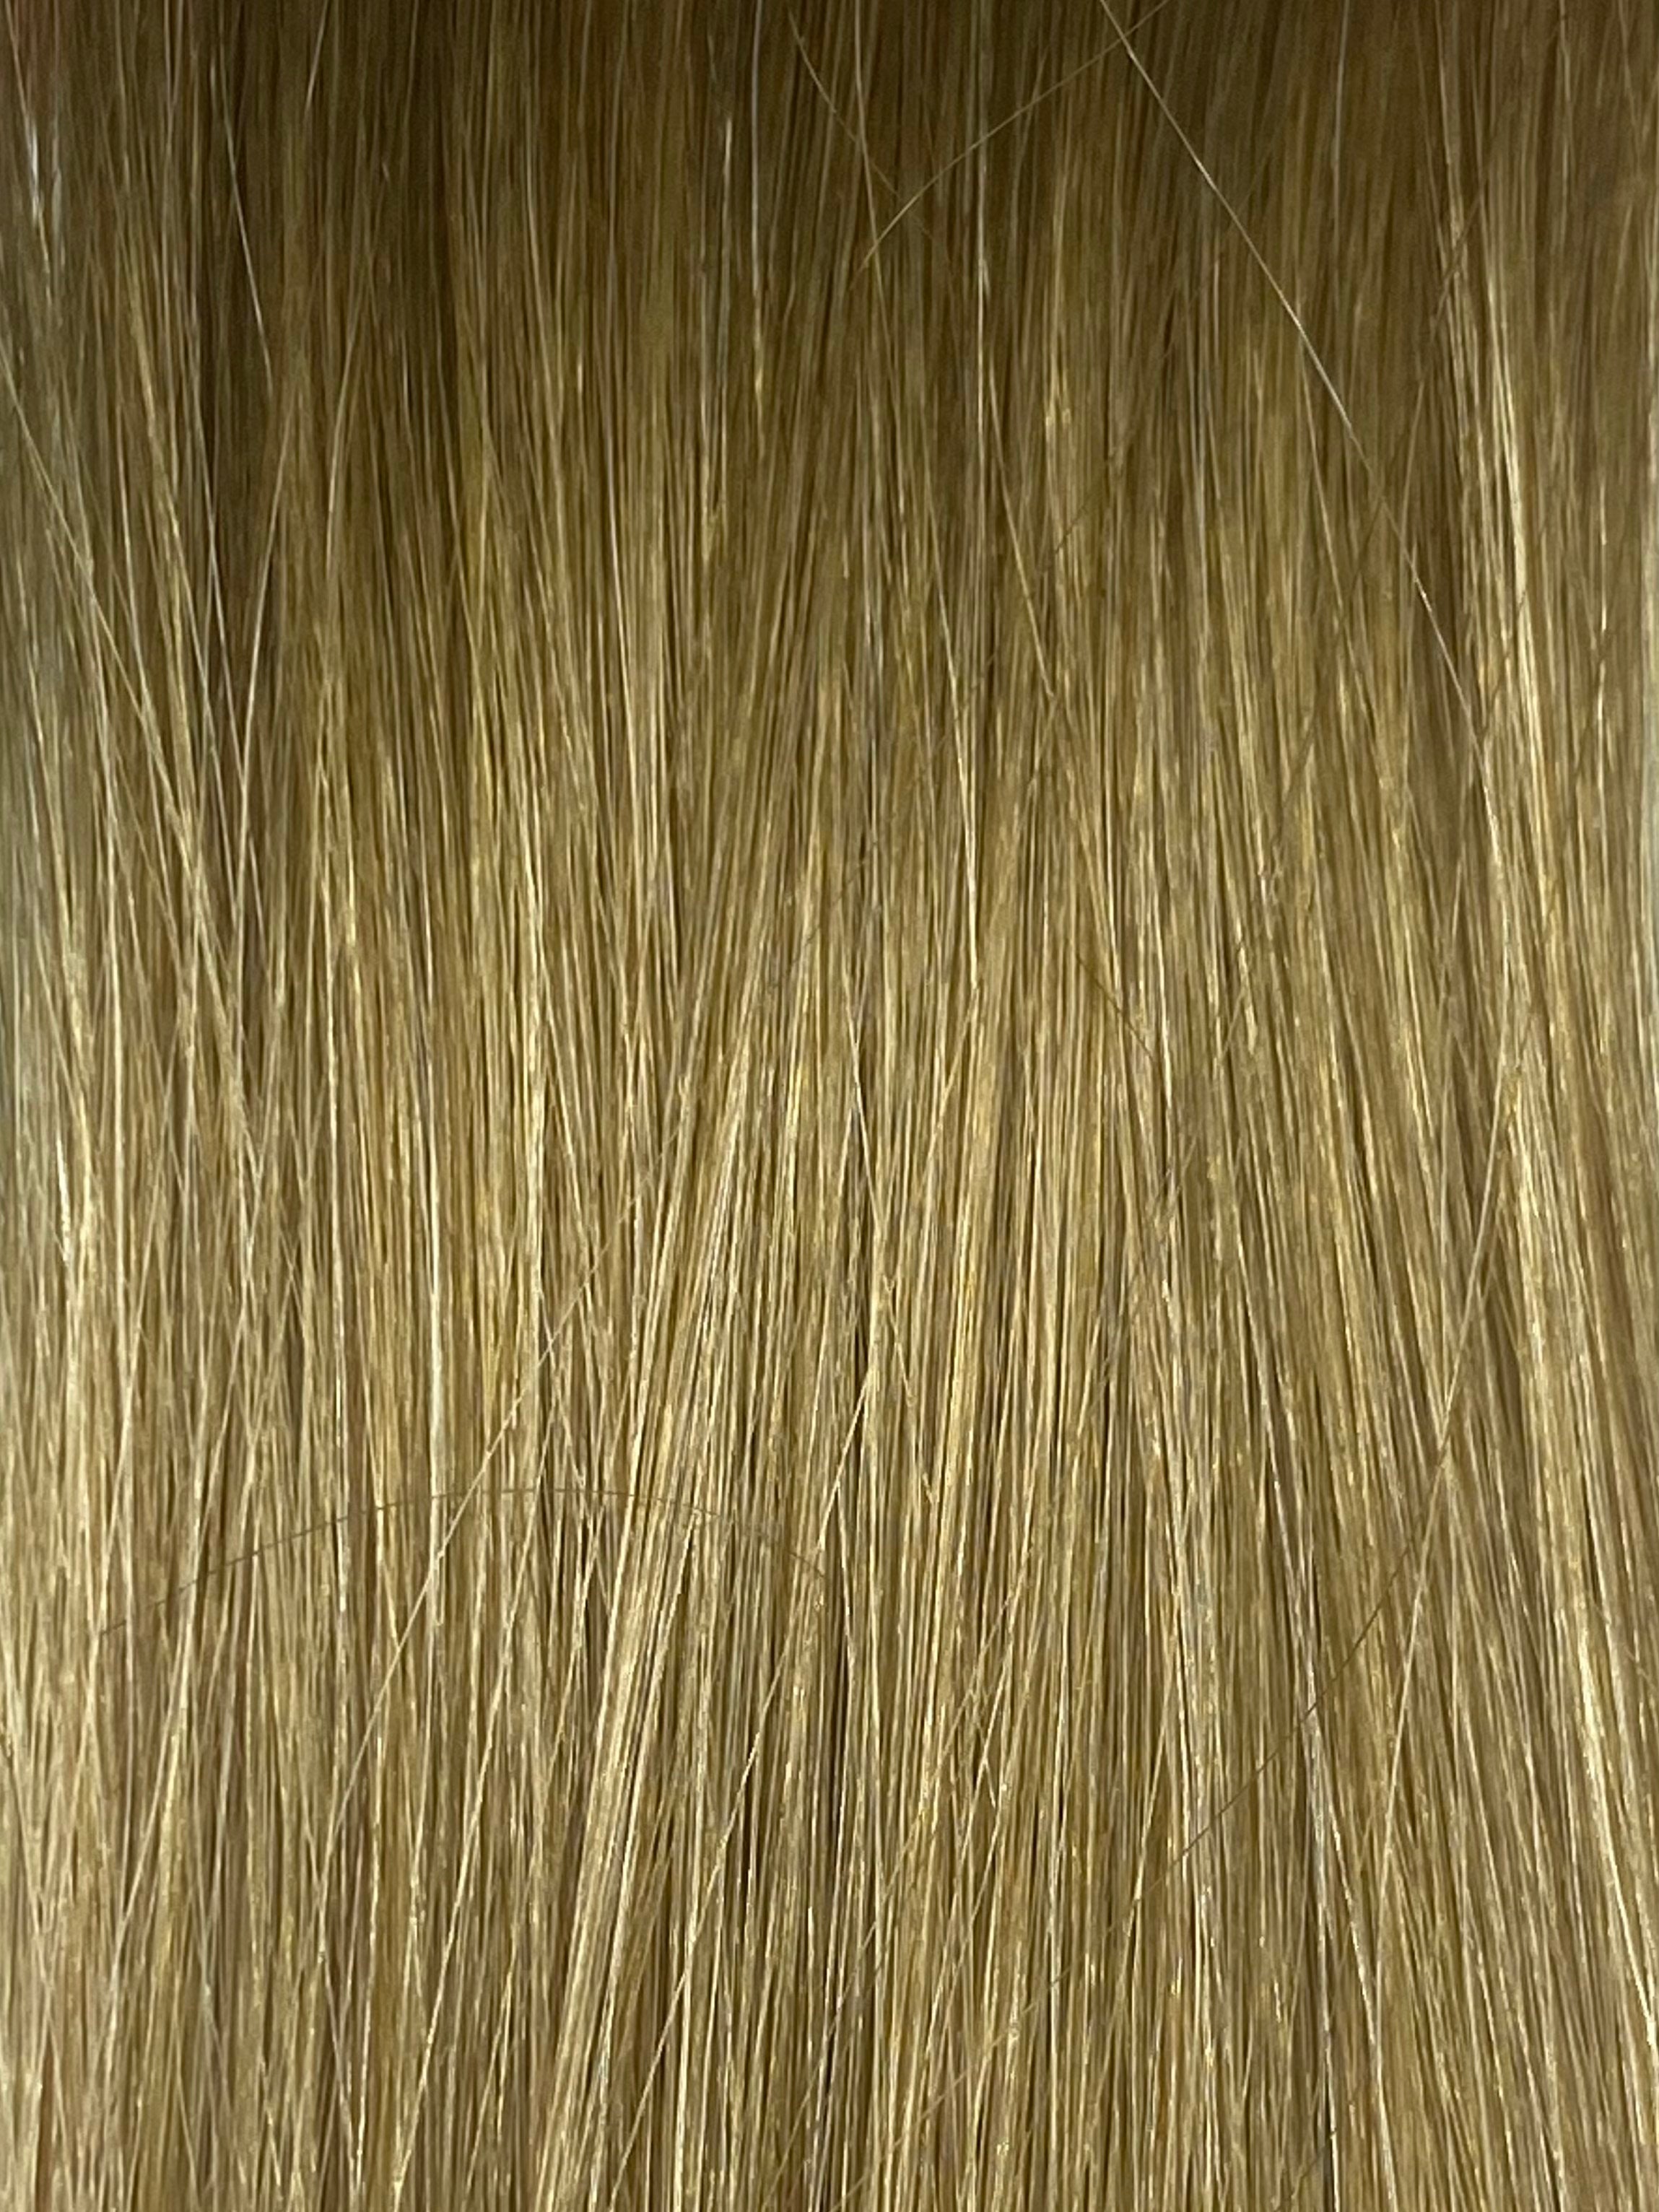 Satin Tape Ombre #10 & 20 - 50cm/20 Inches - Dark Ash Blonde into Very Light Ultra Blonde - 20 Grams